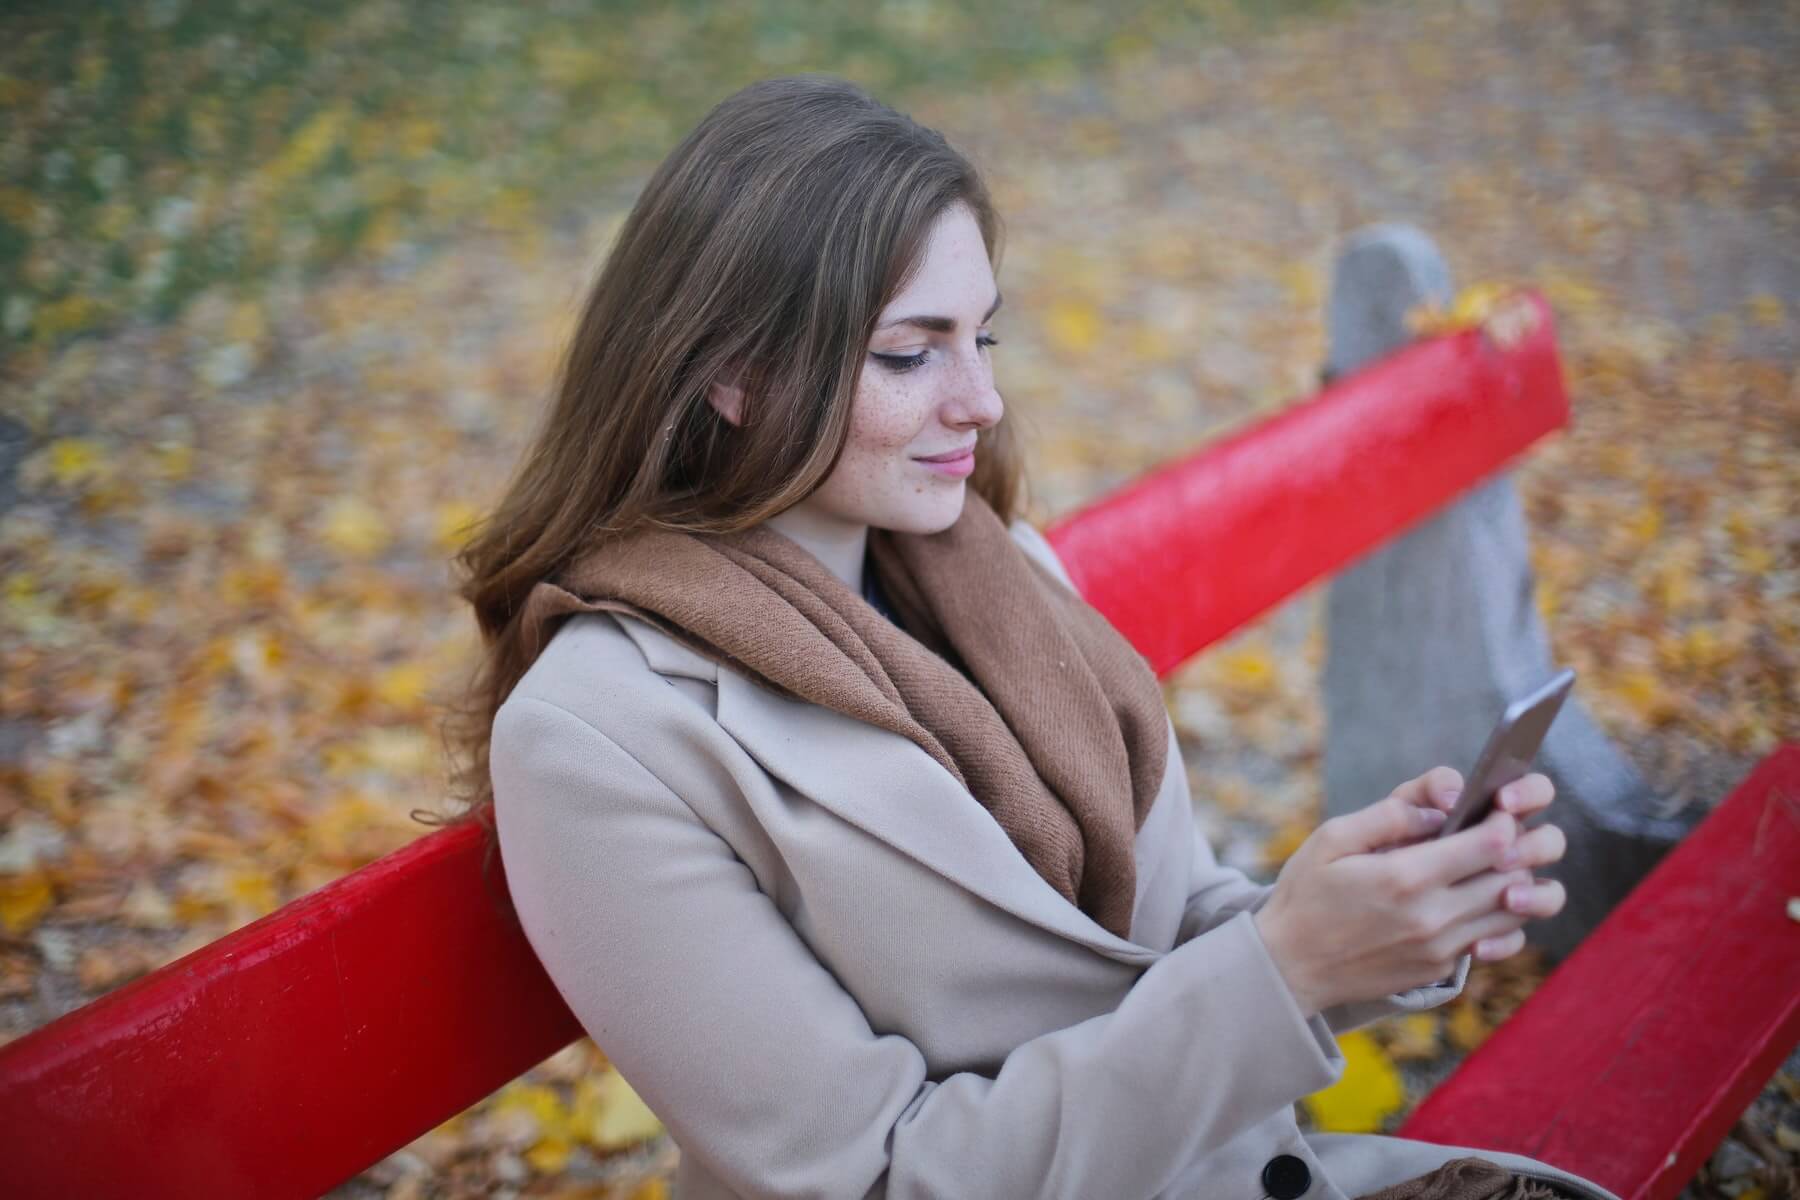 Woman sitting on a park bench, focused on studying on her smartphone.